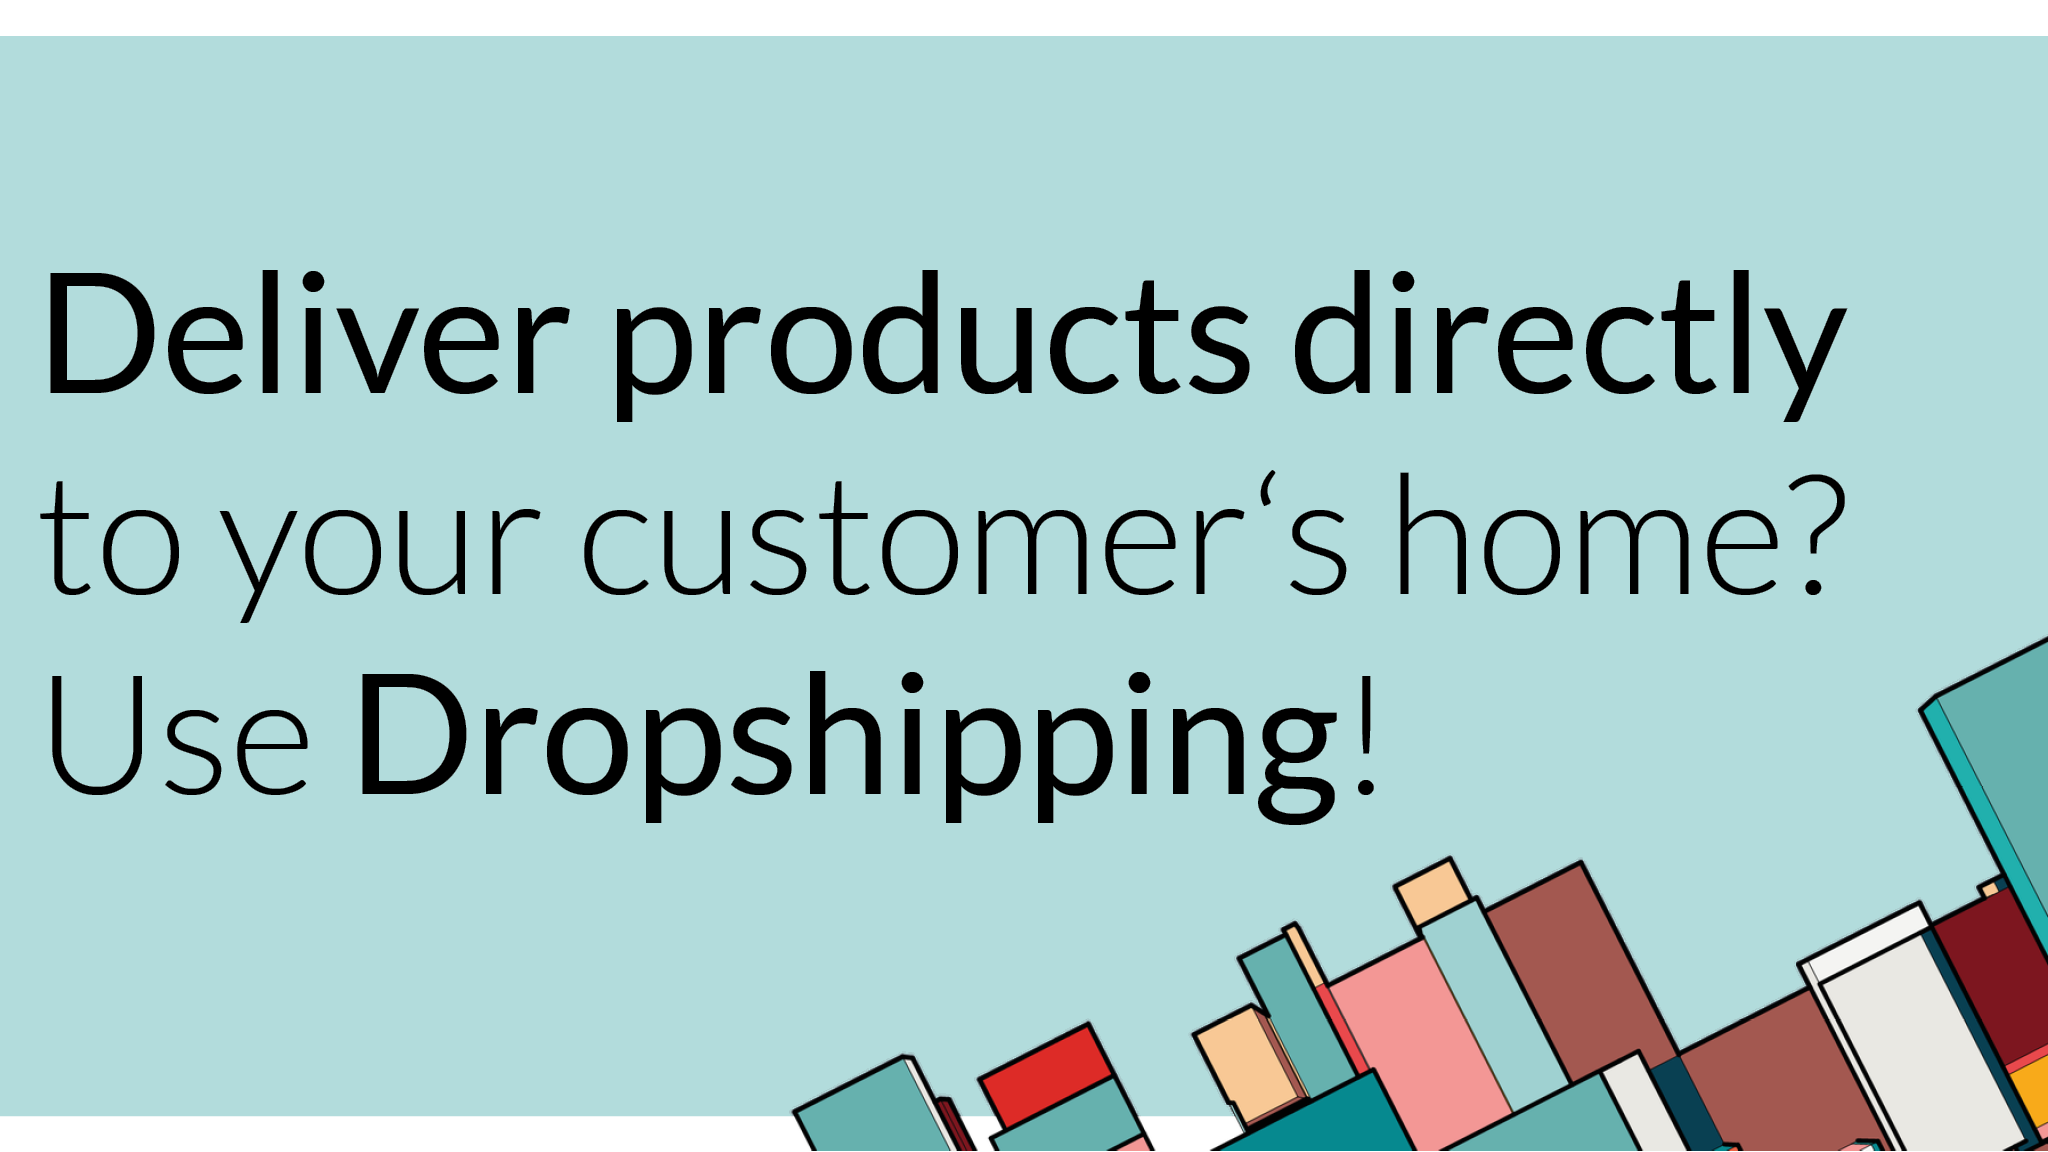 Dropshipping on Nextrade – The easy way to expand your business